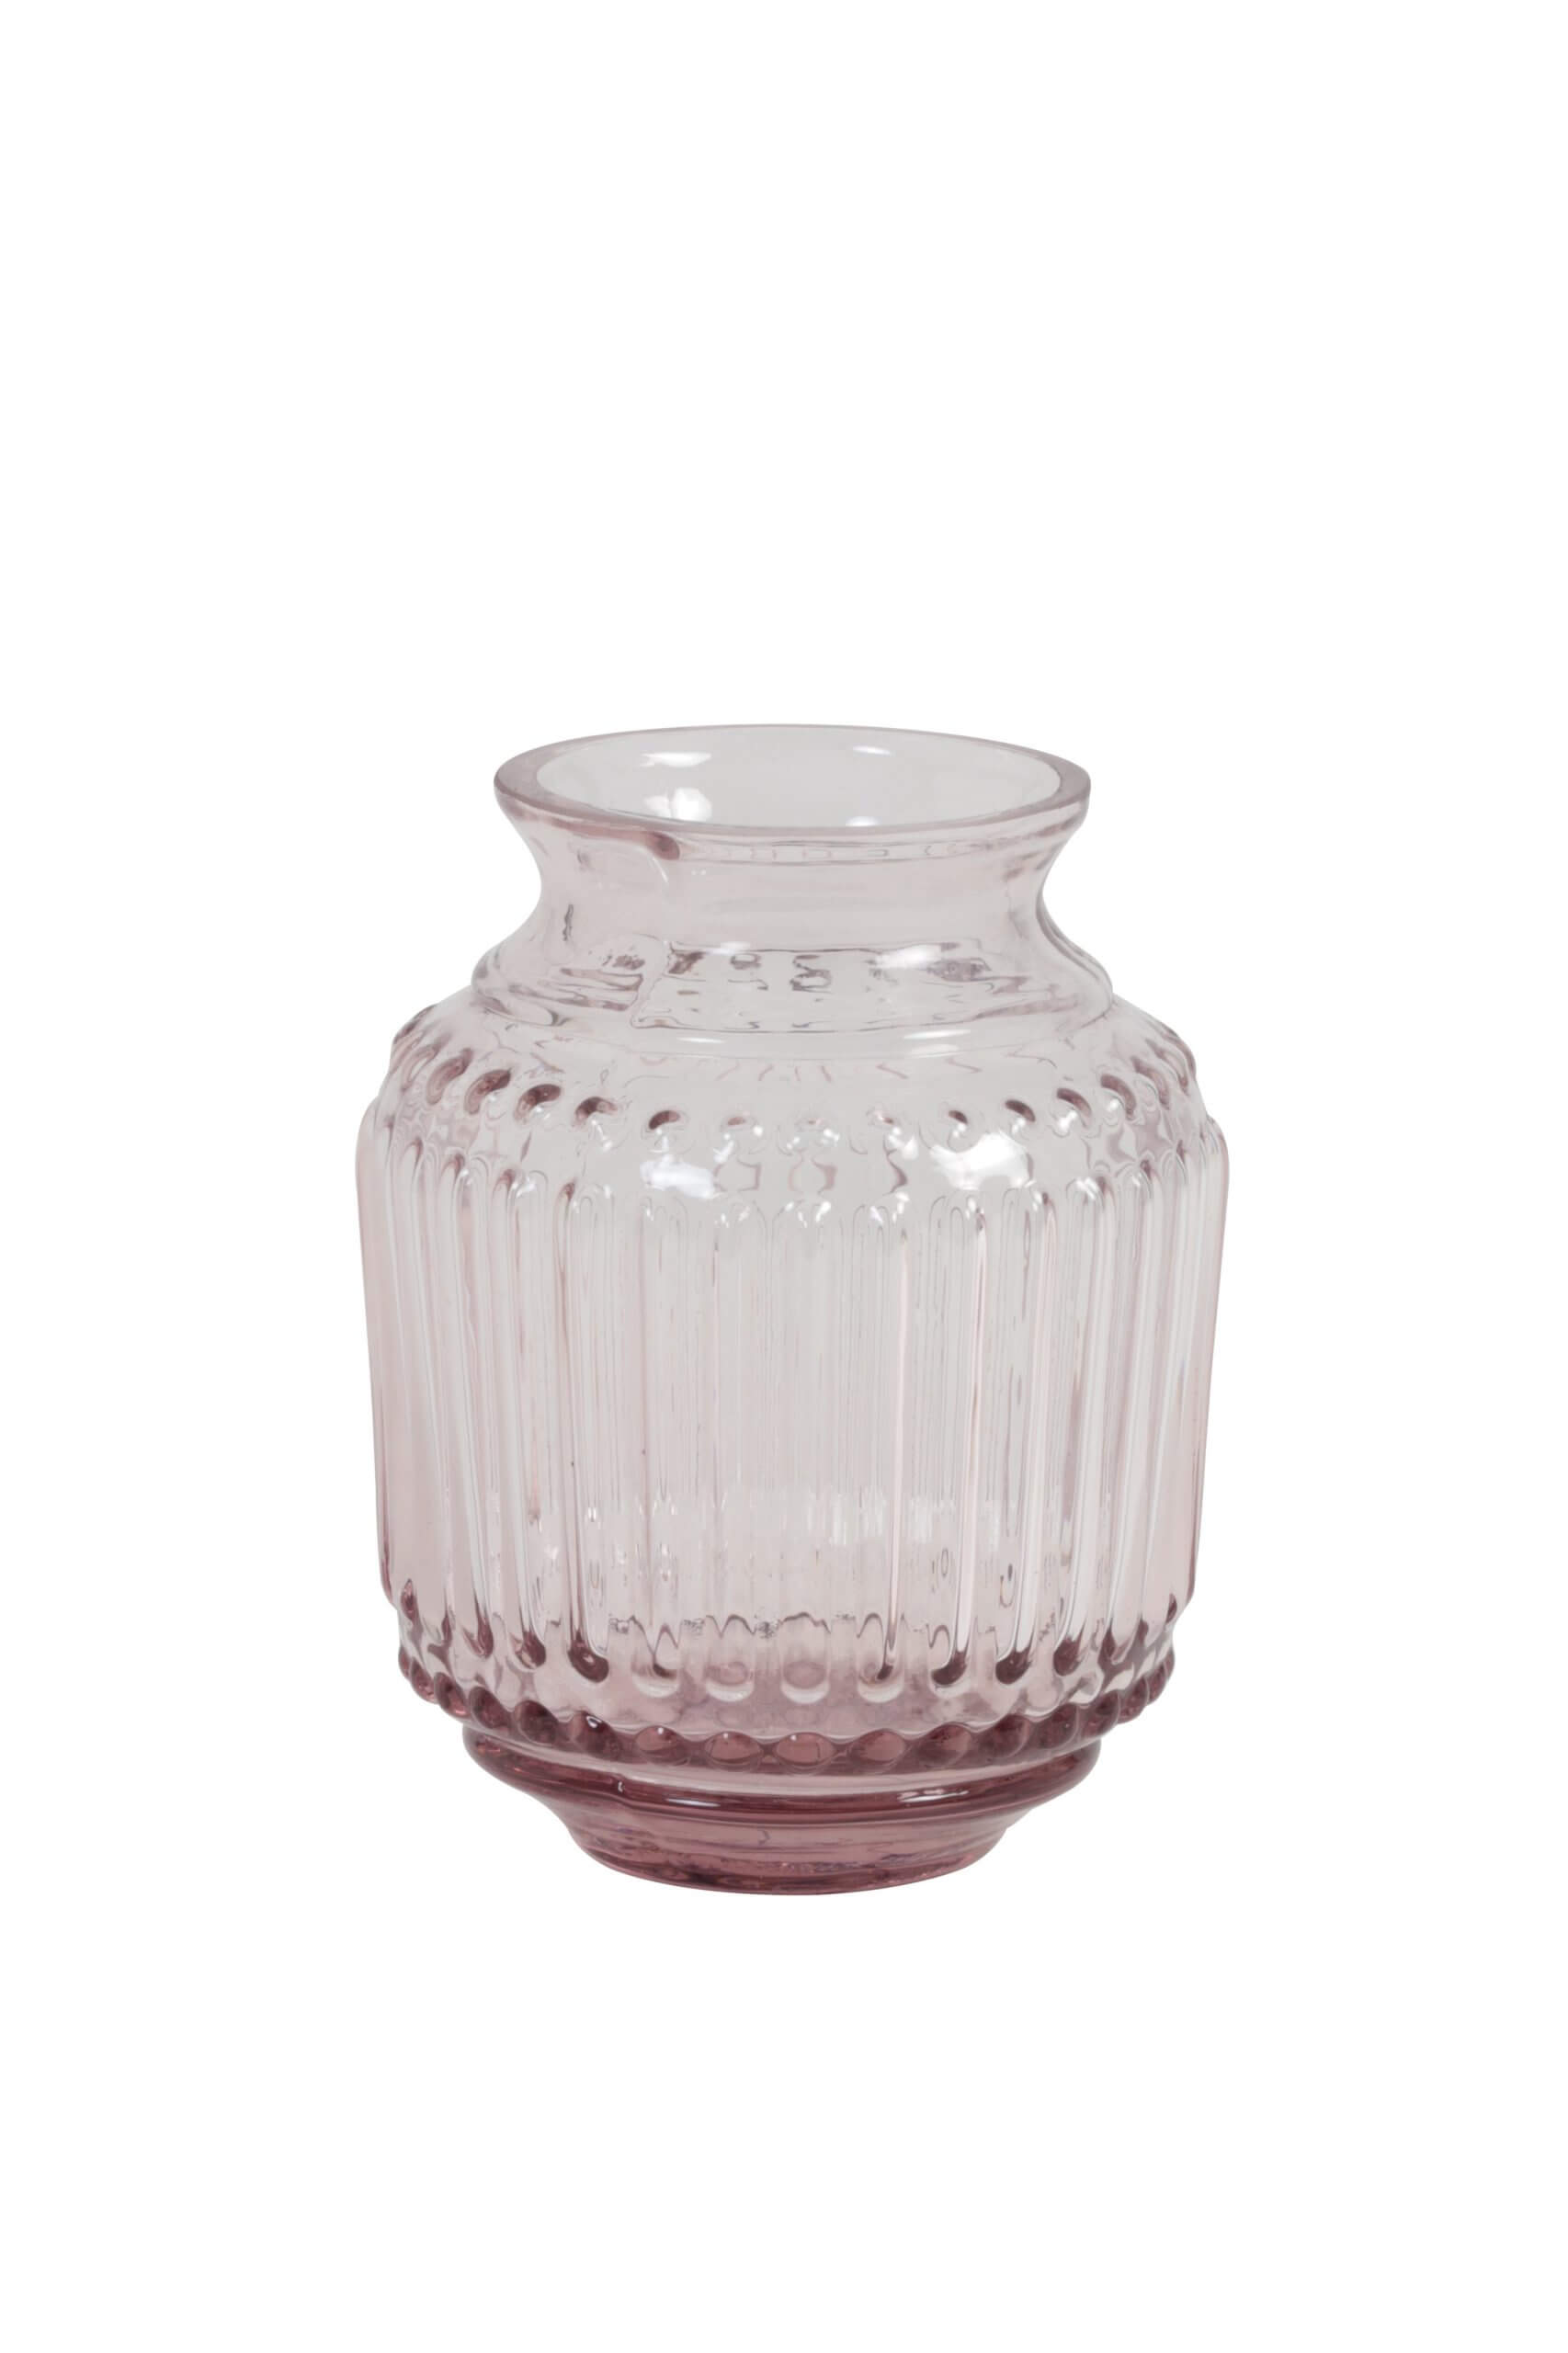 Small pink glass vase